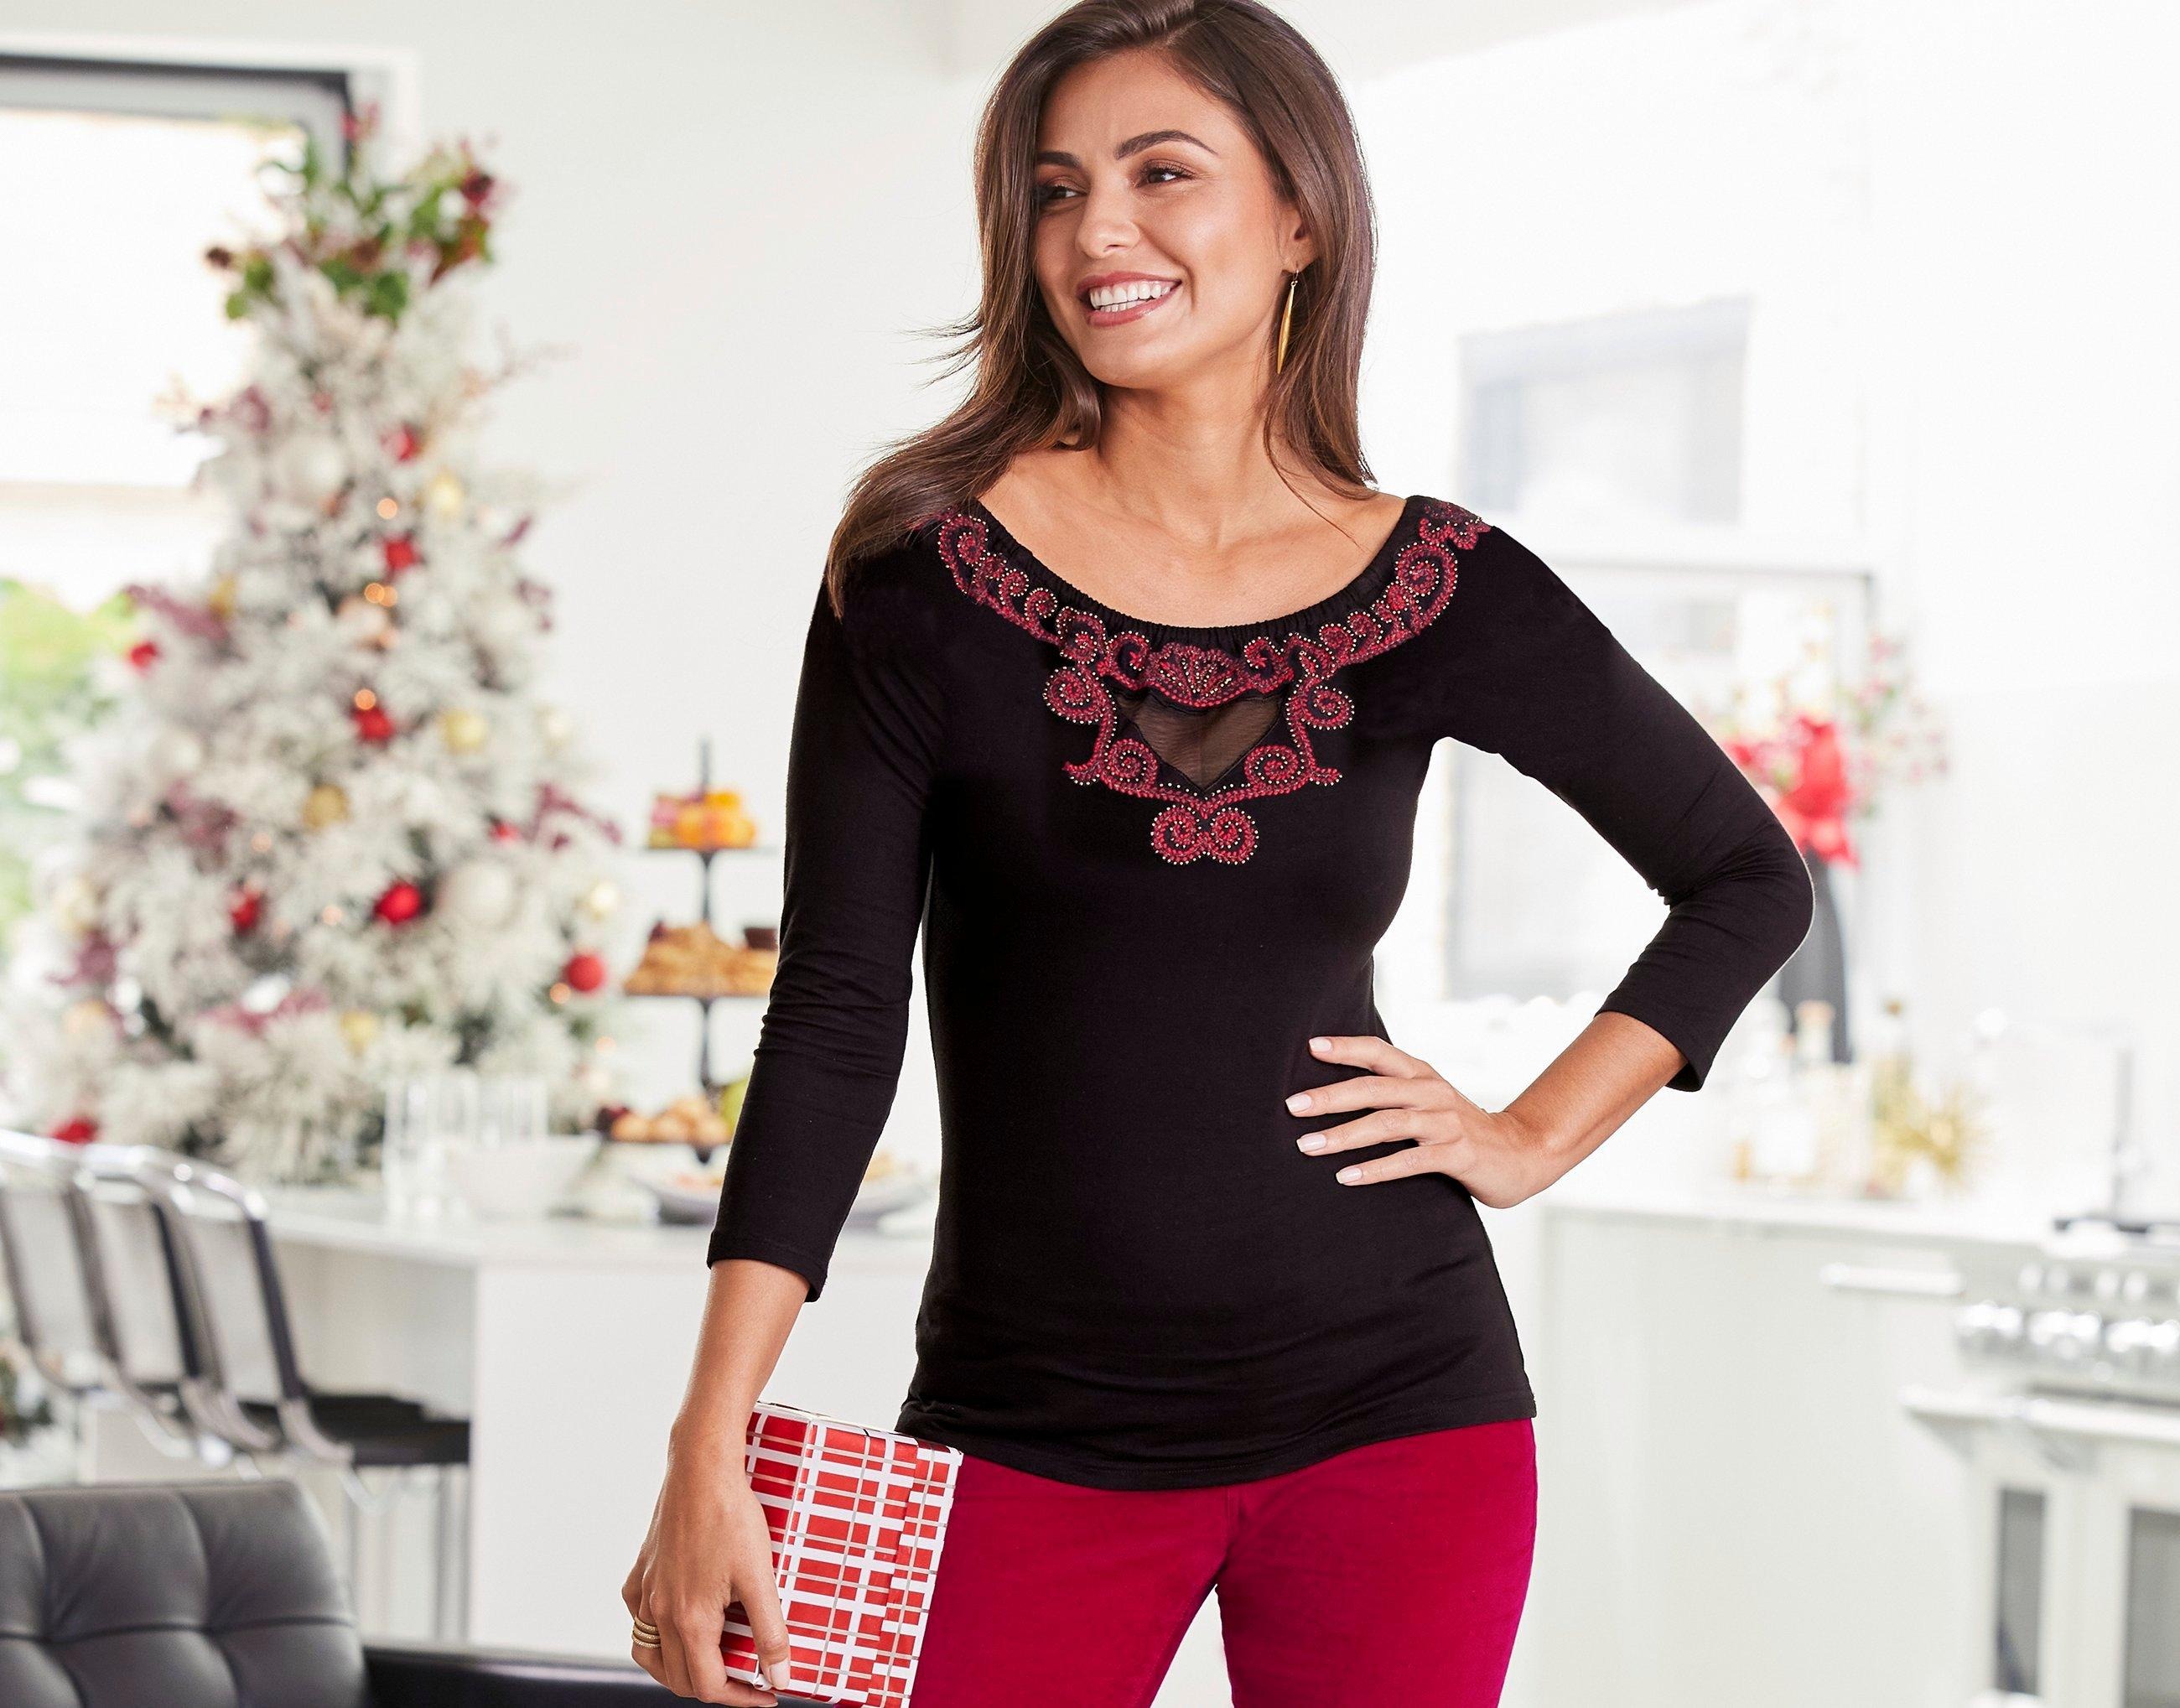 model wearing a black and red embroidered sweater and red velvet pants.